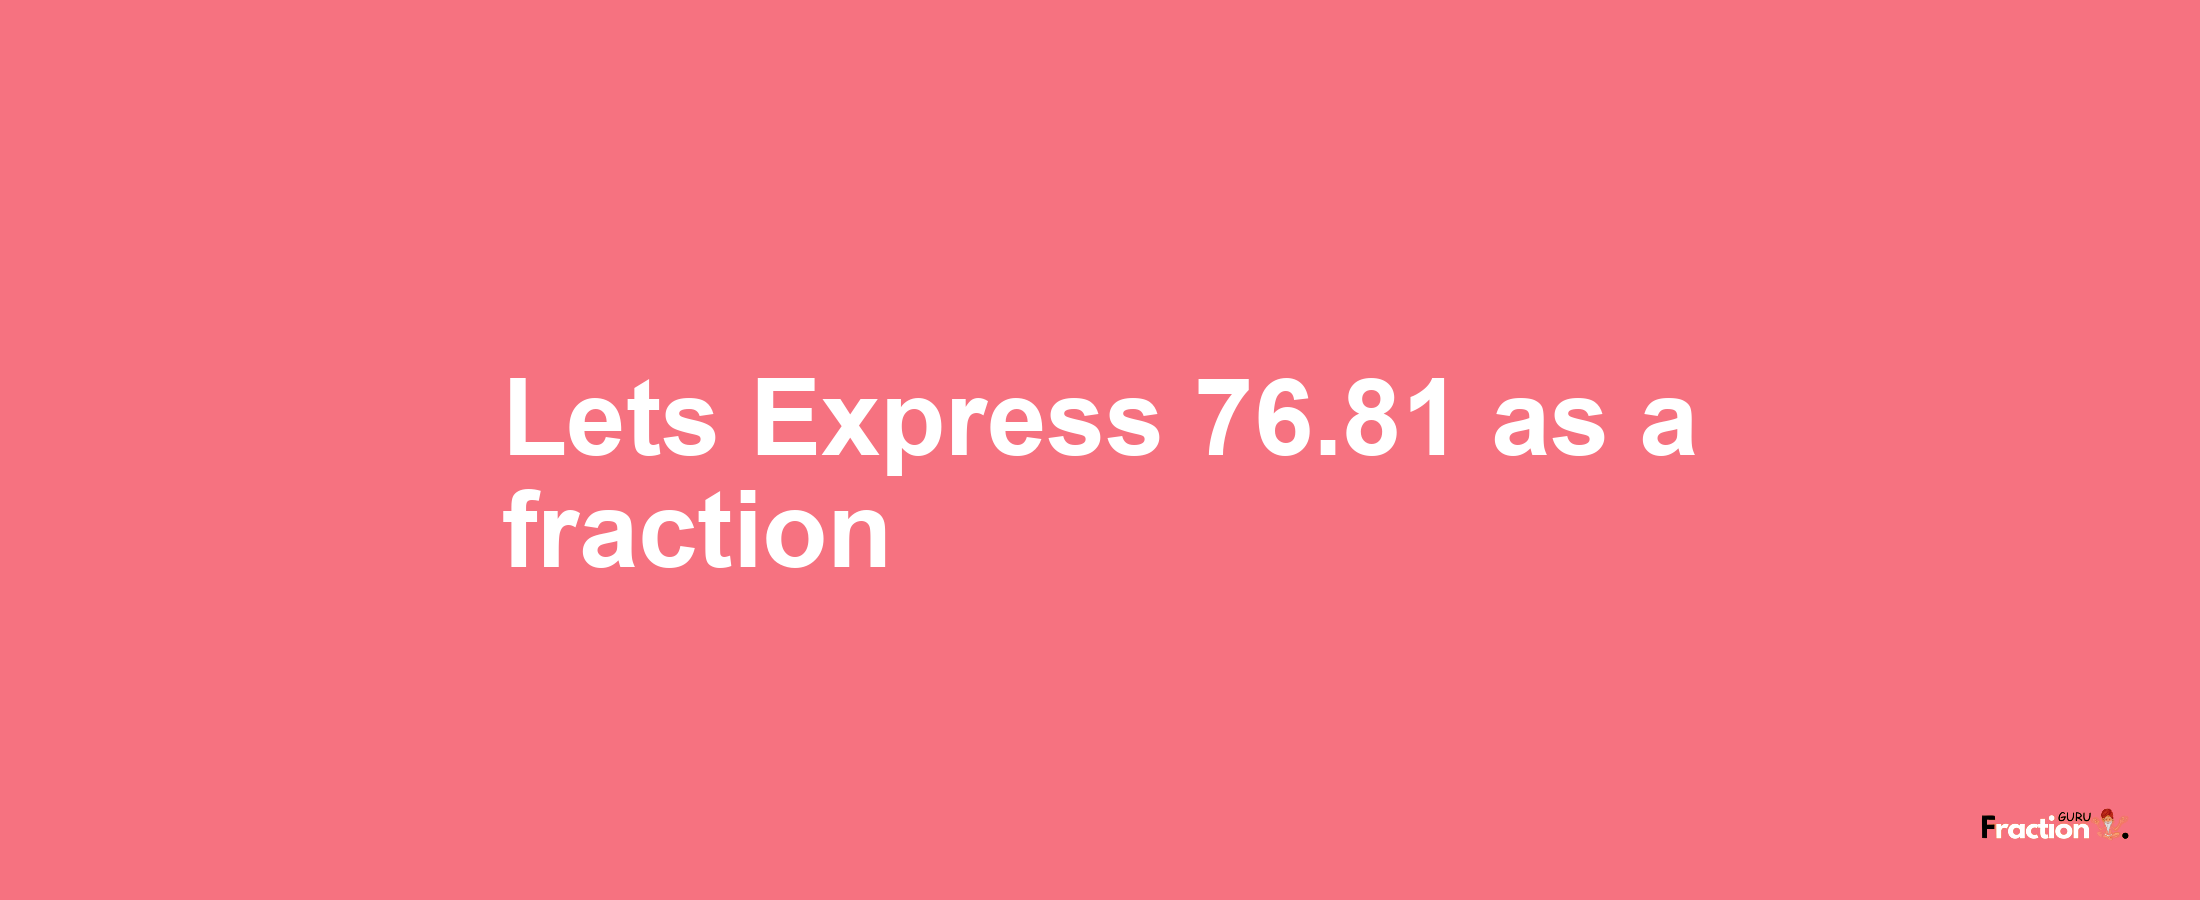 Lets Express 76.81 as afraction